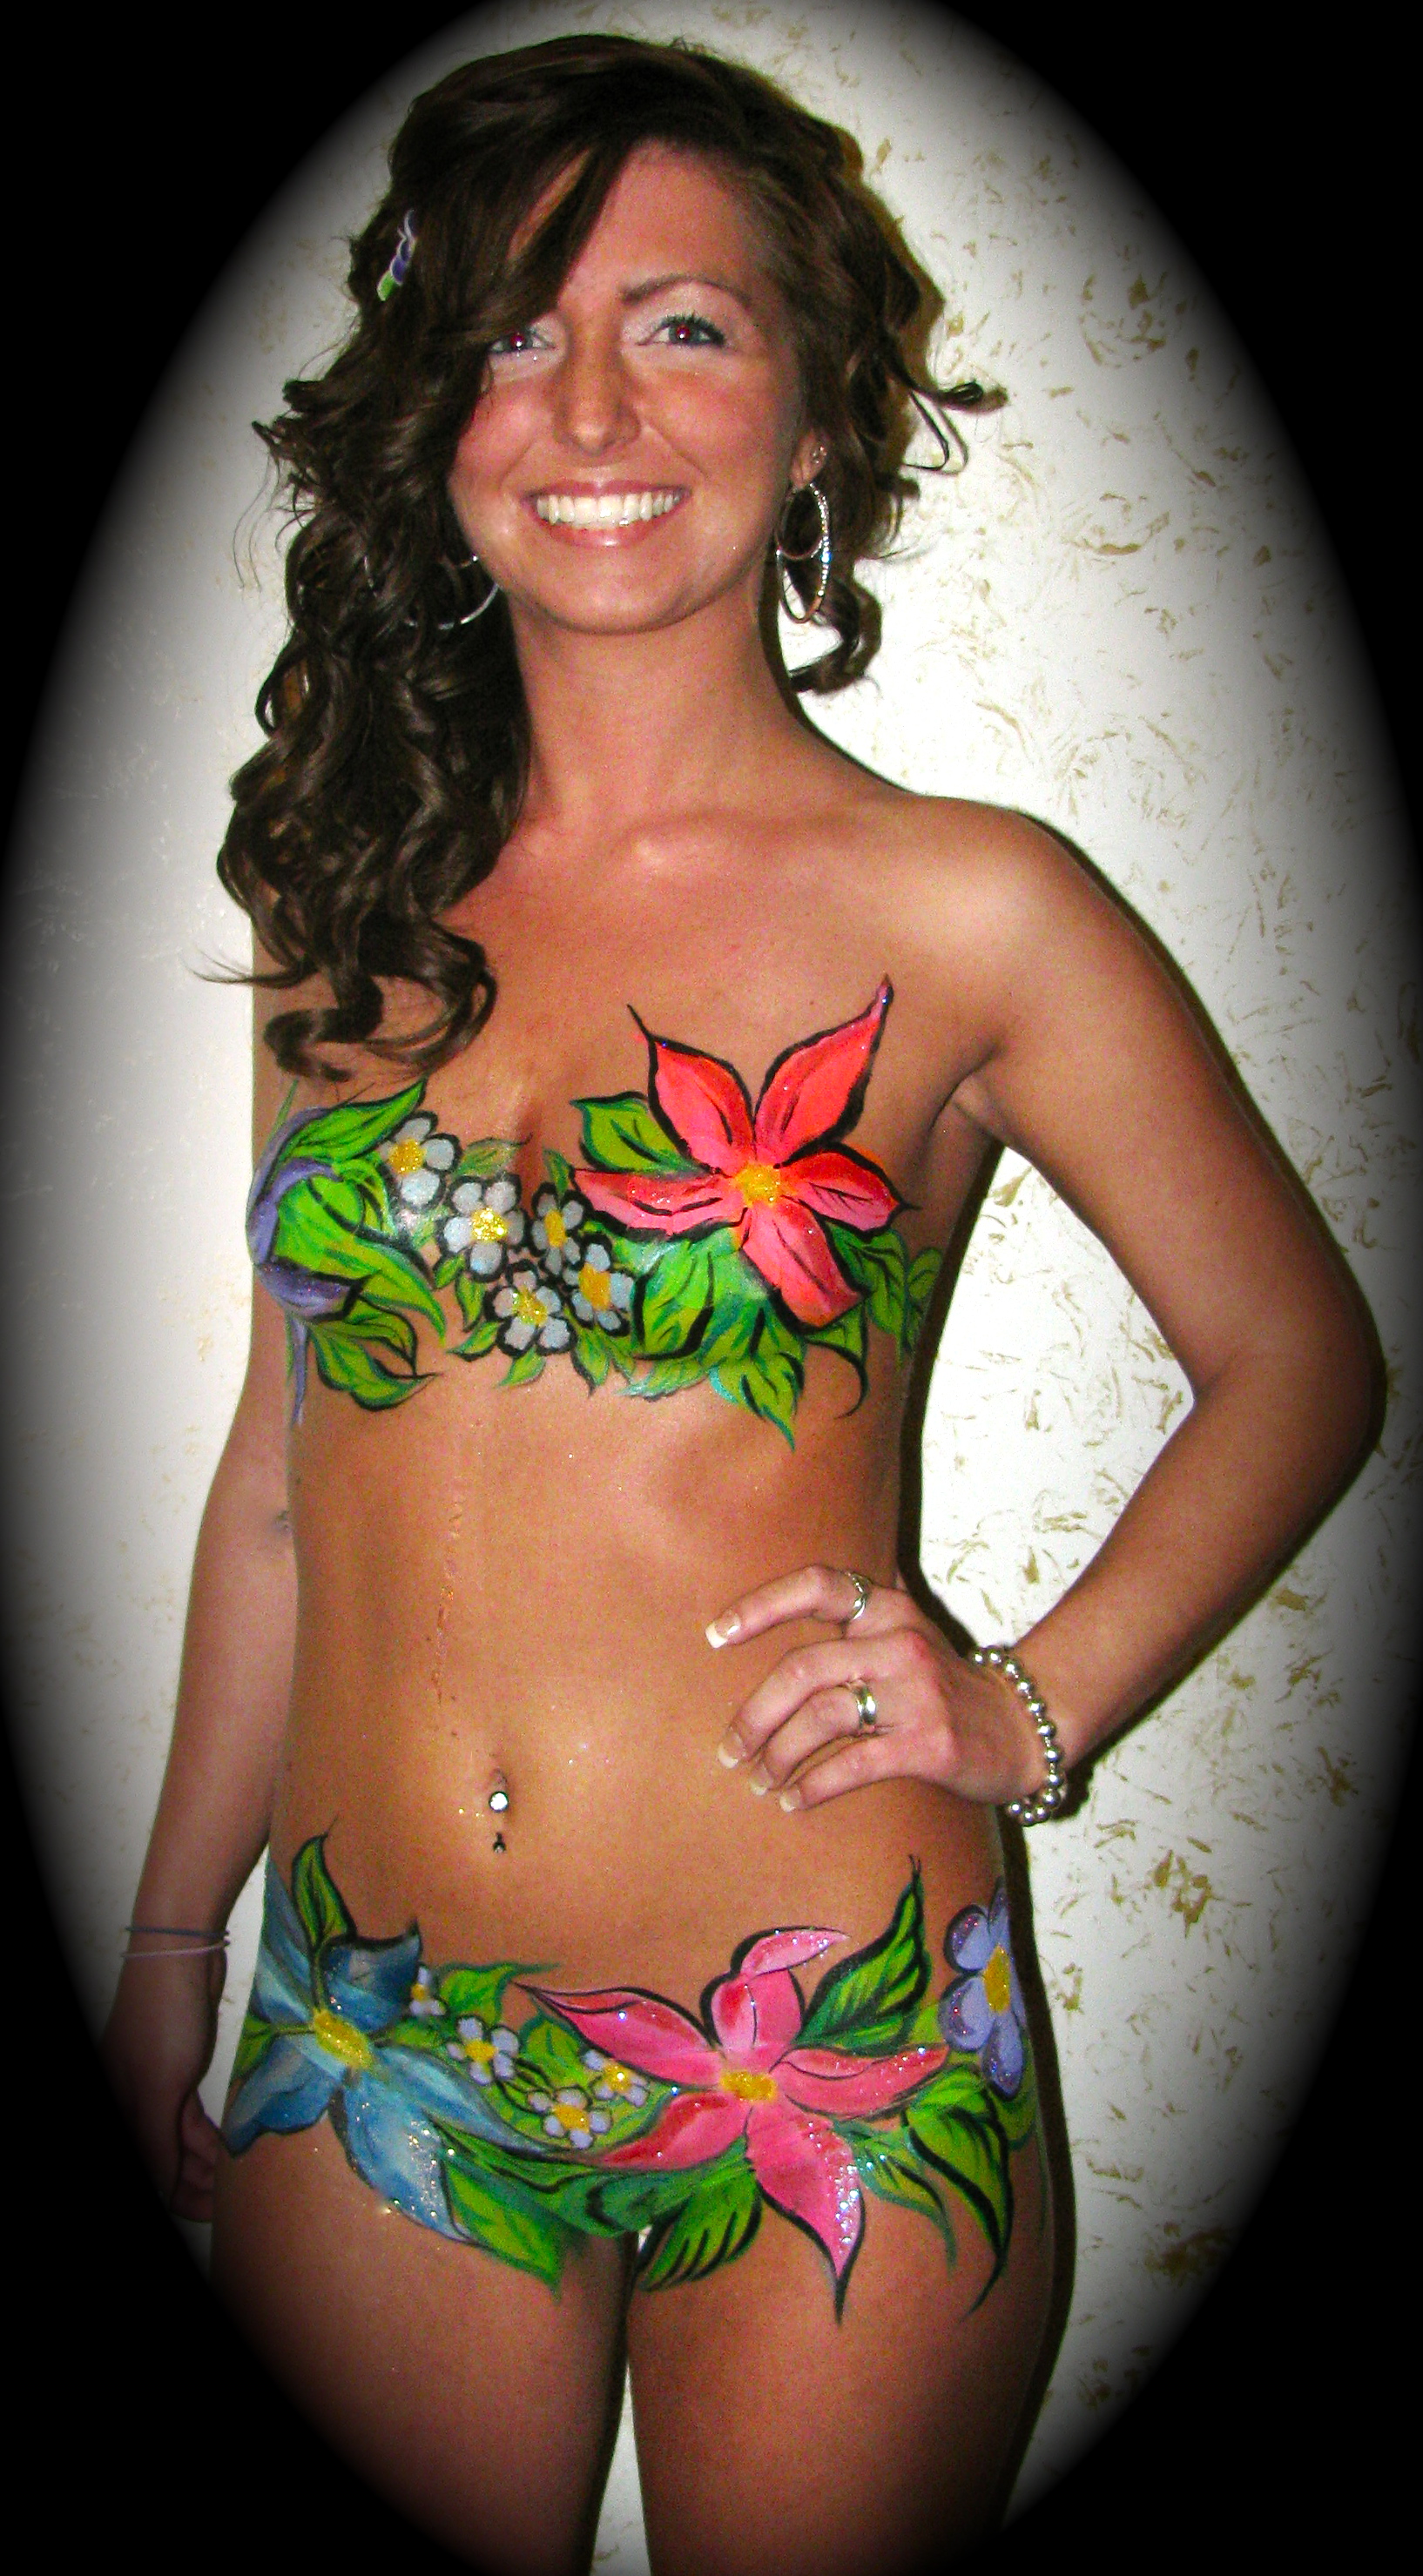 painted on flower bikini « Funtastic Faces and Body Art|face painting face  painter glitter tattoos henna